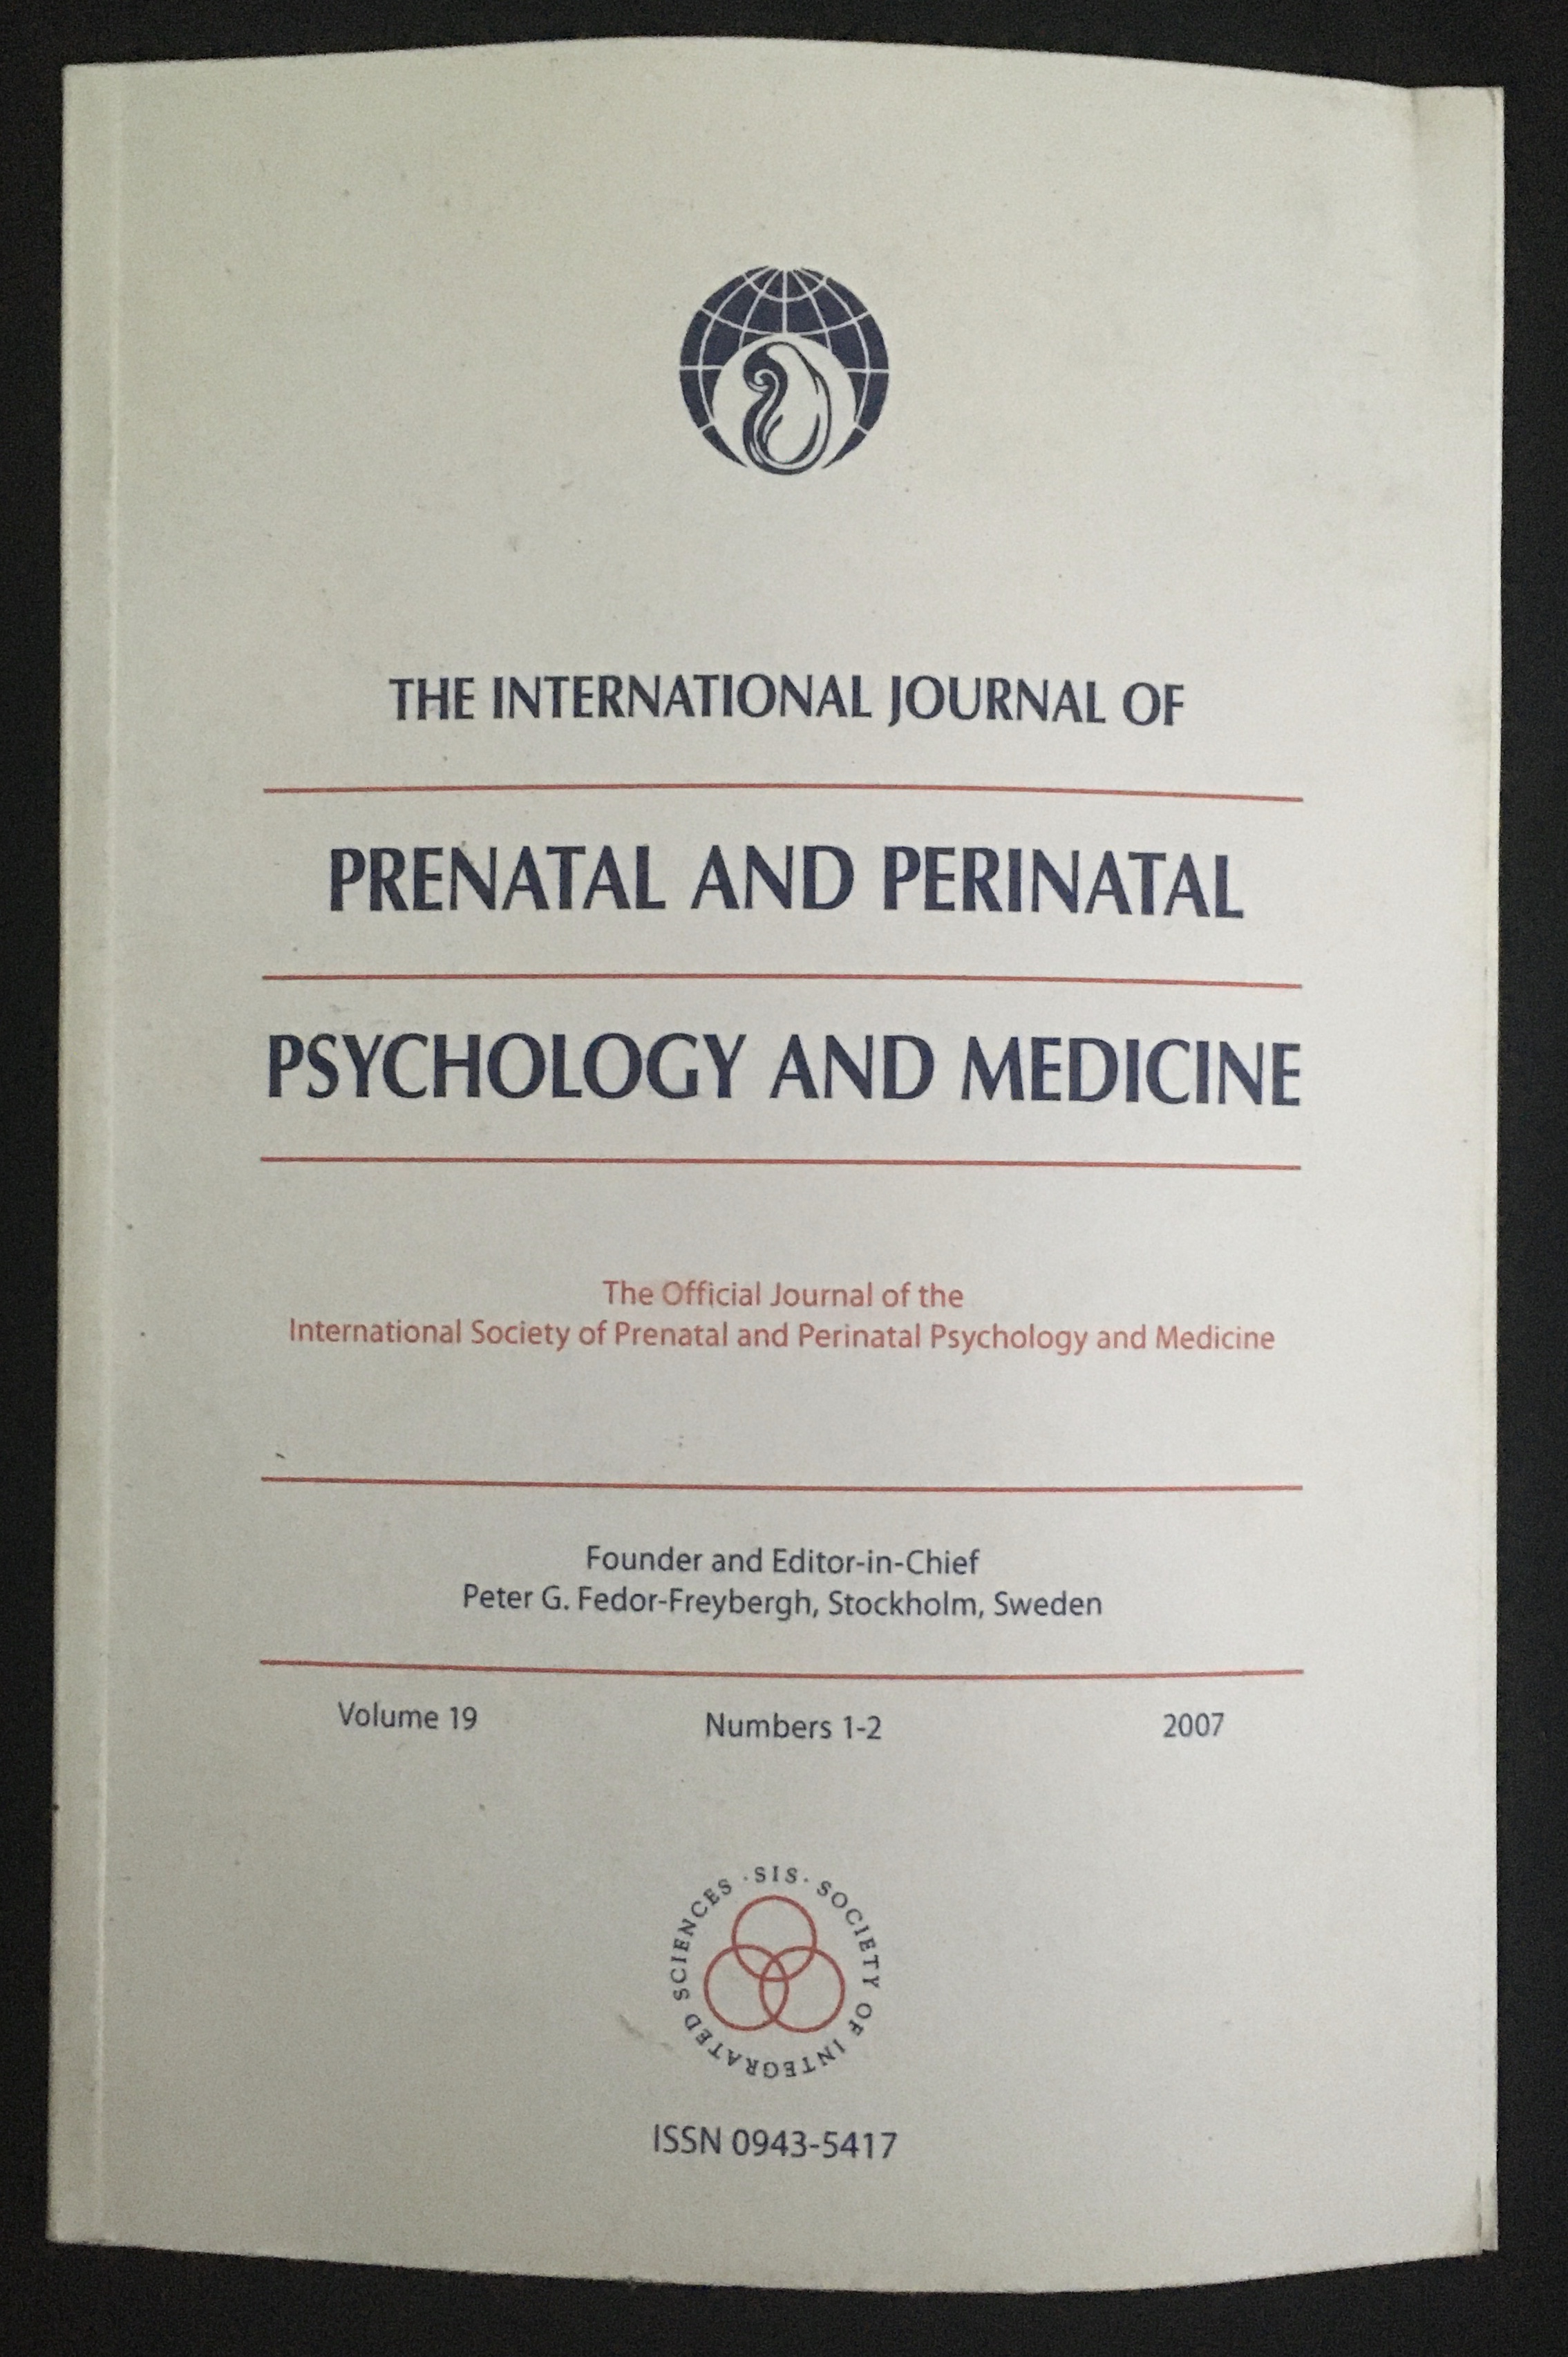 The international journal of prenatal and perinatal psychlogy and medicine